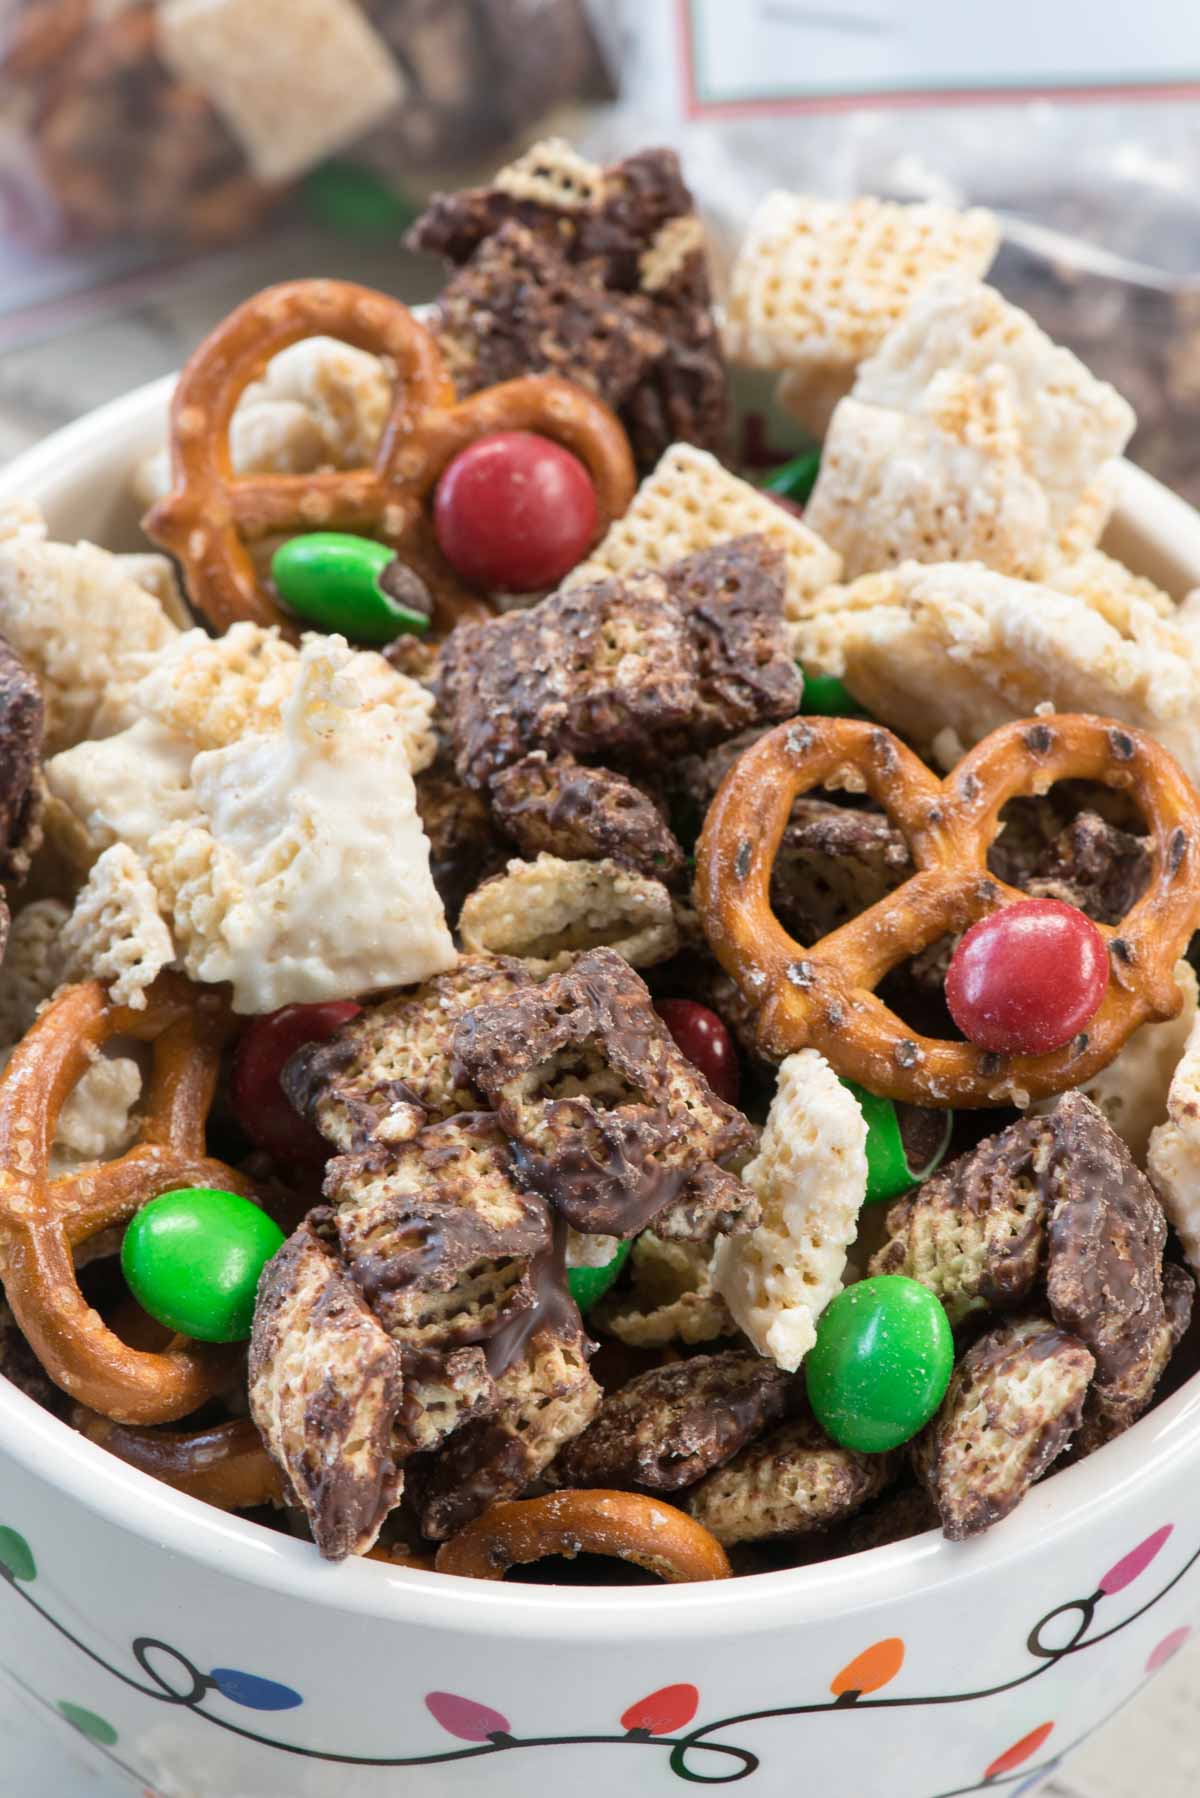 Elf Munch is the perfect Christmas snack mix! Chocolate coated Chex mixed with pretzels and candy are a great party treat for the kids especially with the FREE printable tags.